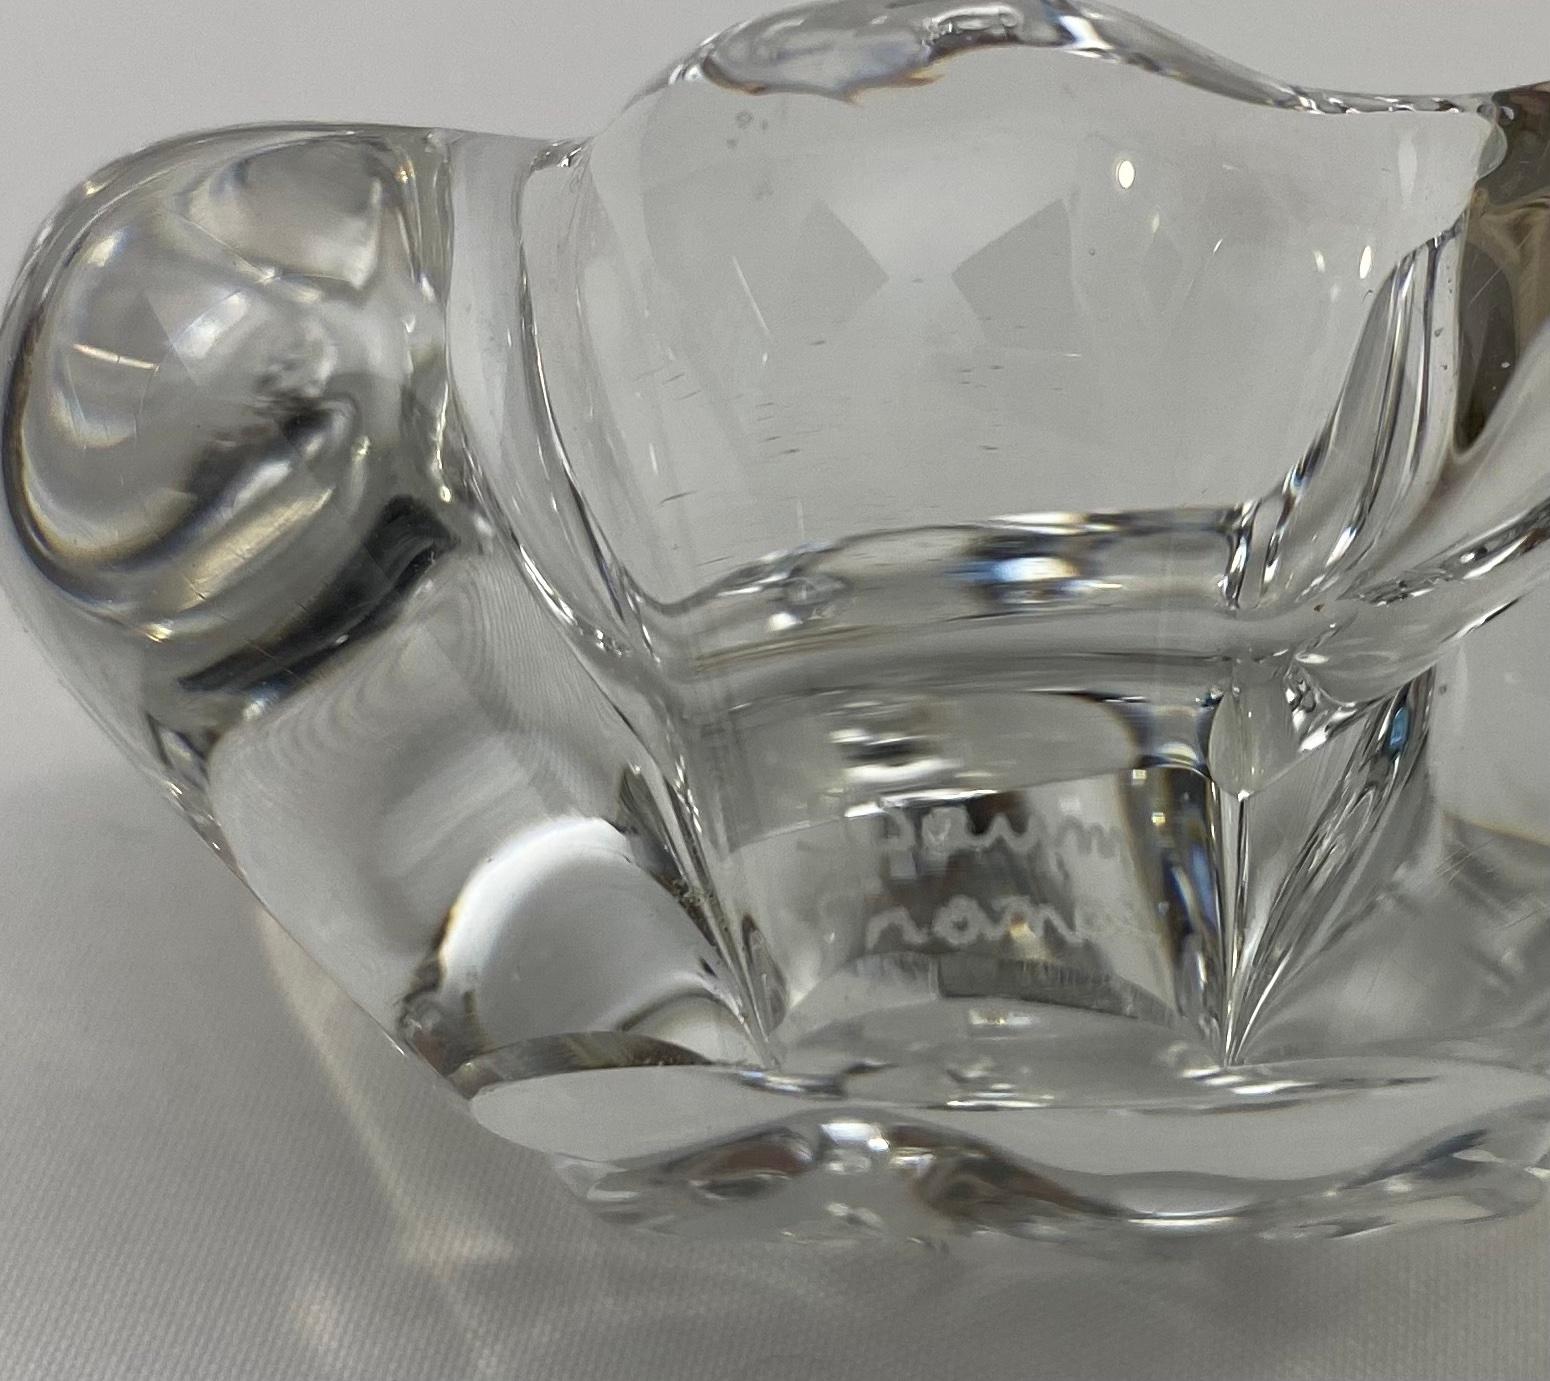 French Set of 2 Daum Salt and Pepper Crystal Serving Dishes by Daum France Signed For Sale